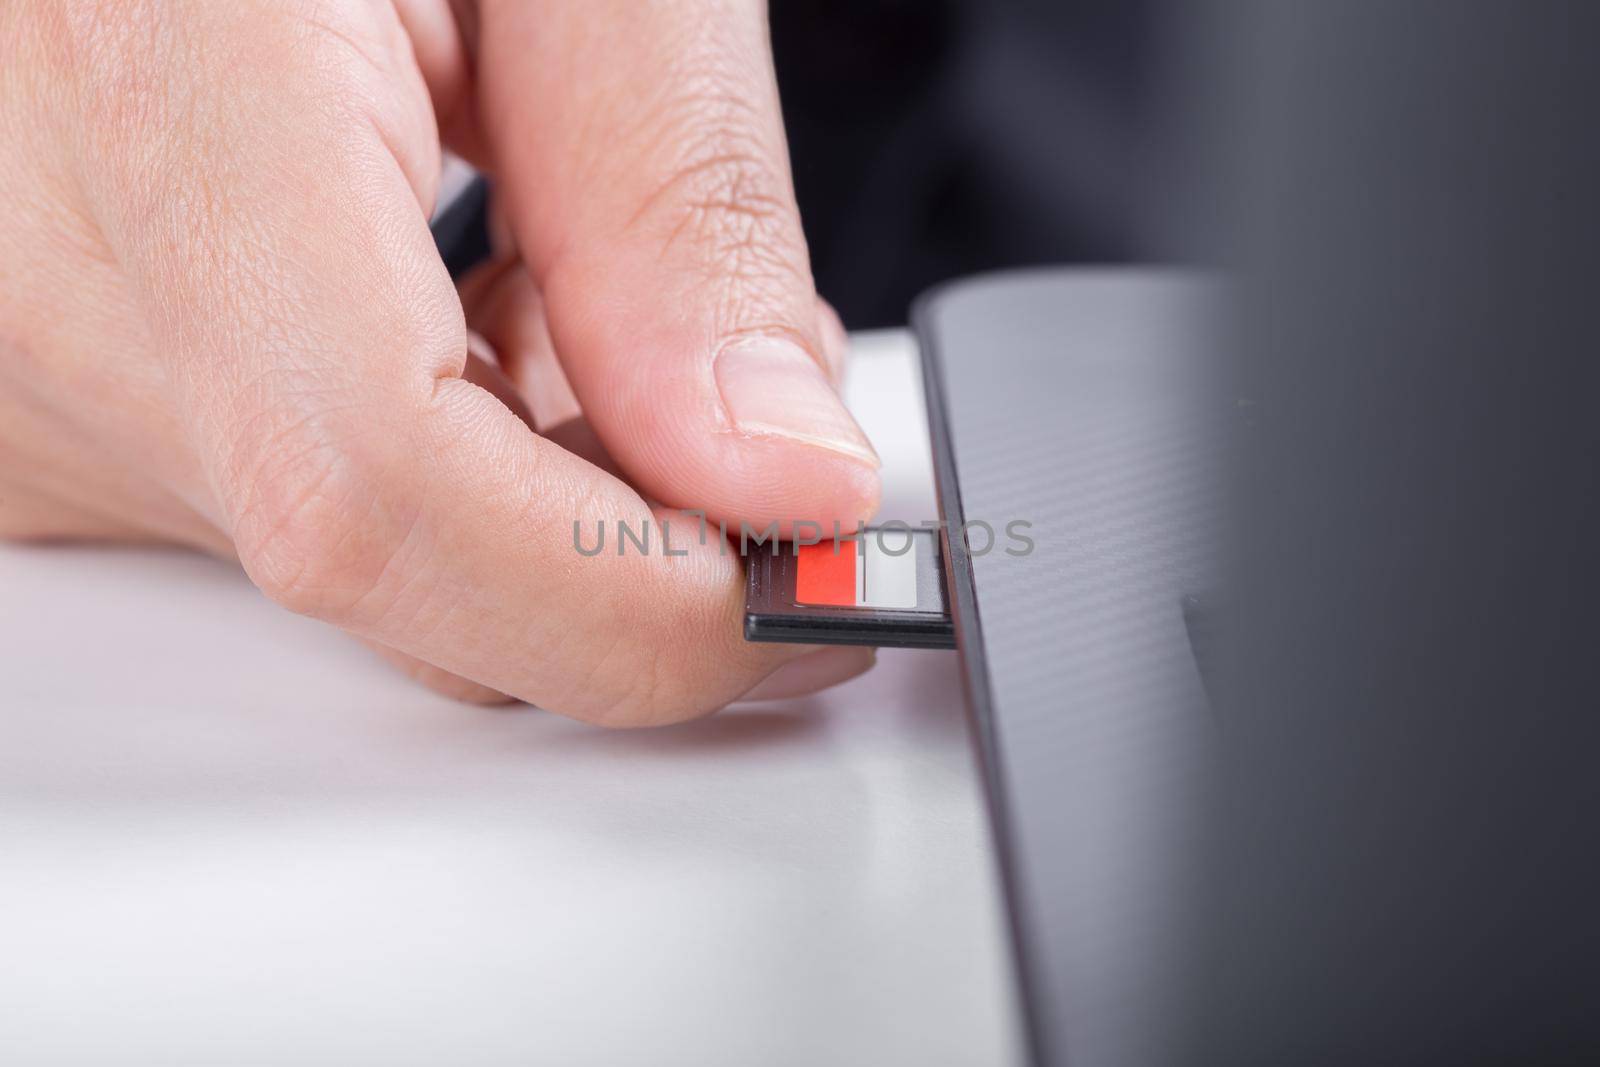  hand inserting SD card into laptop slot